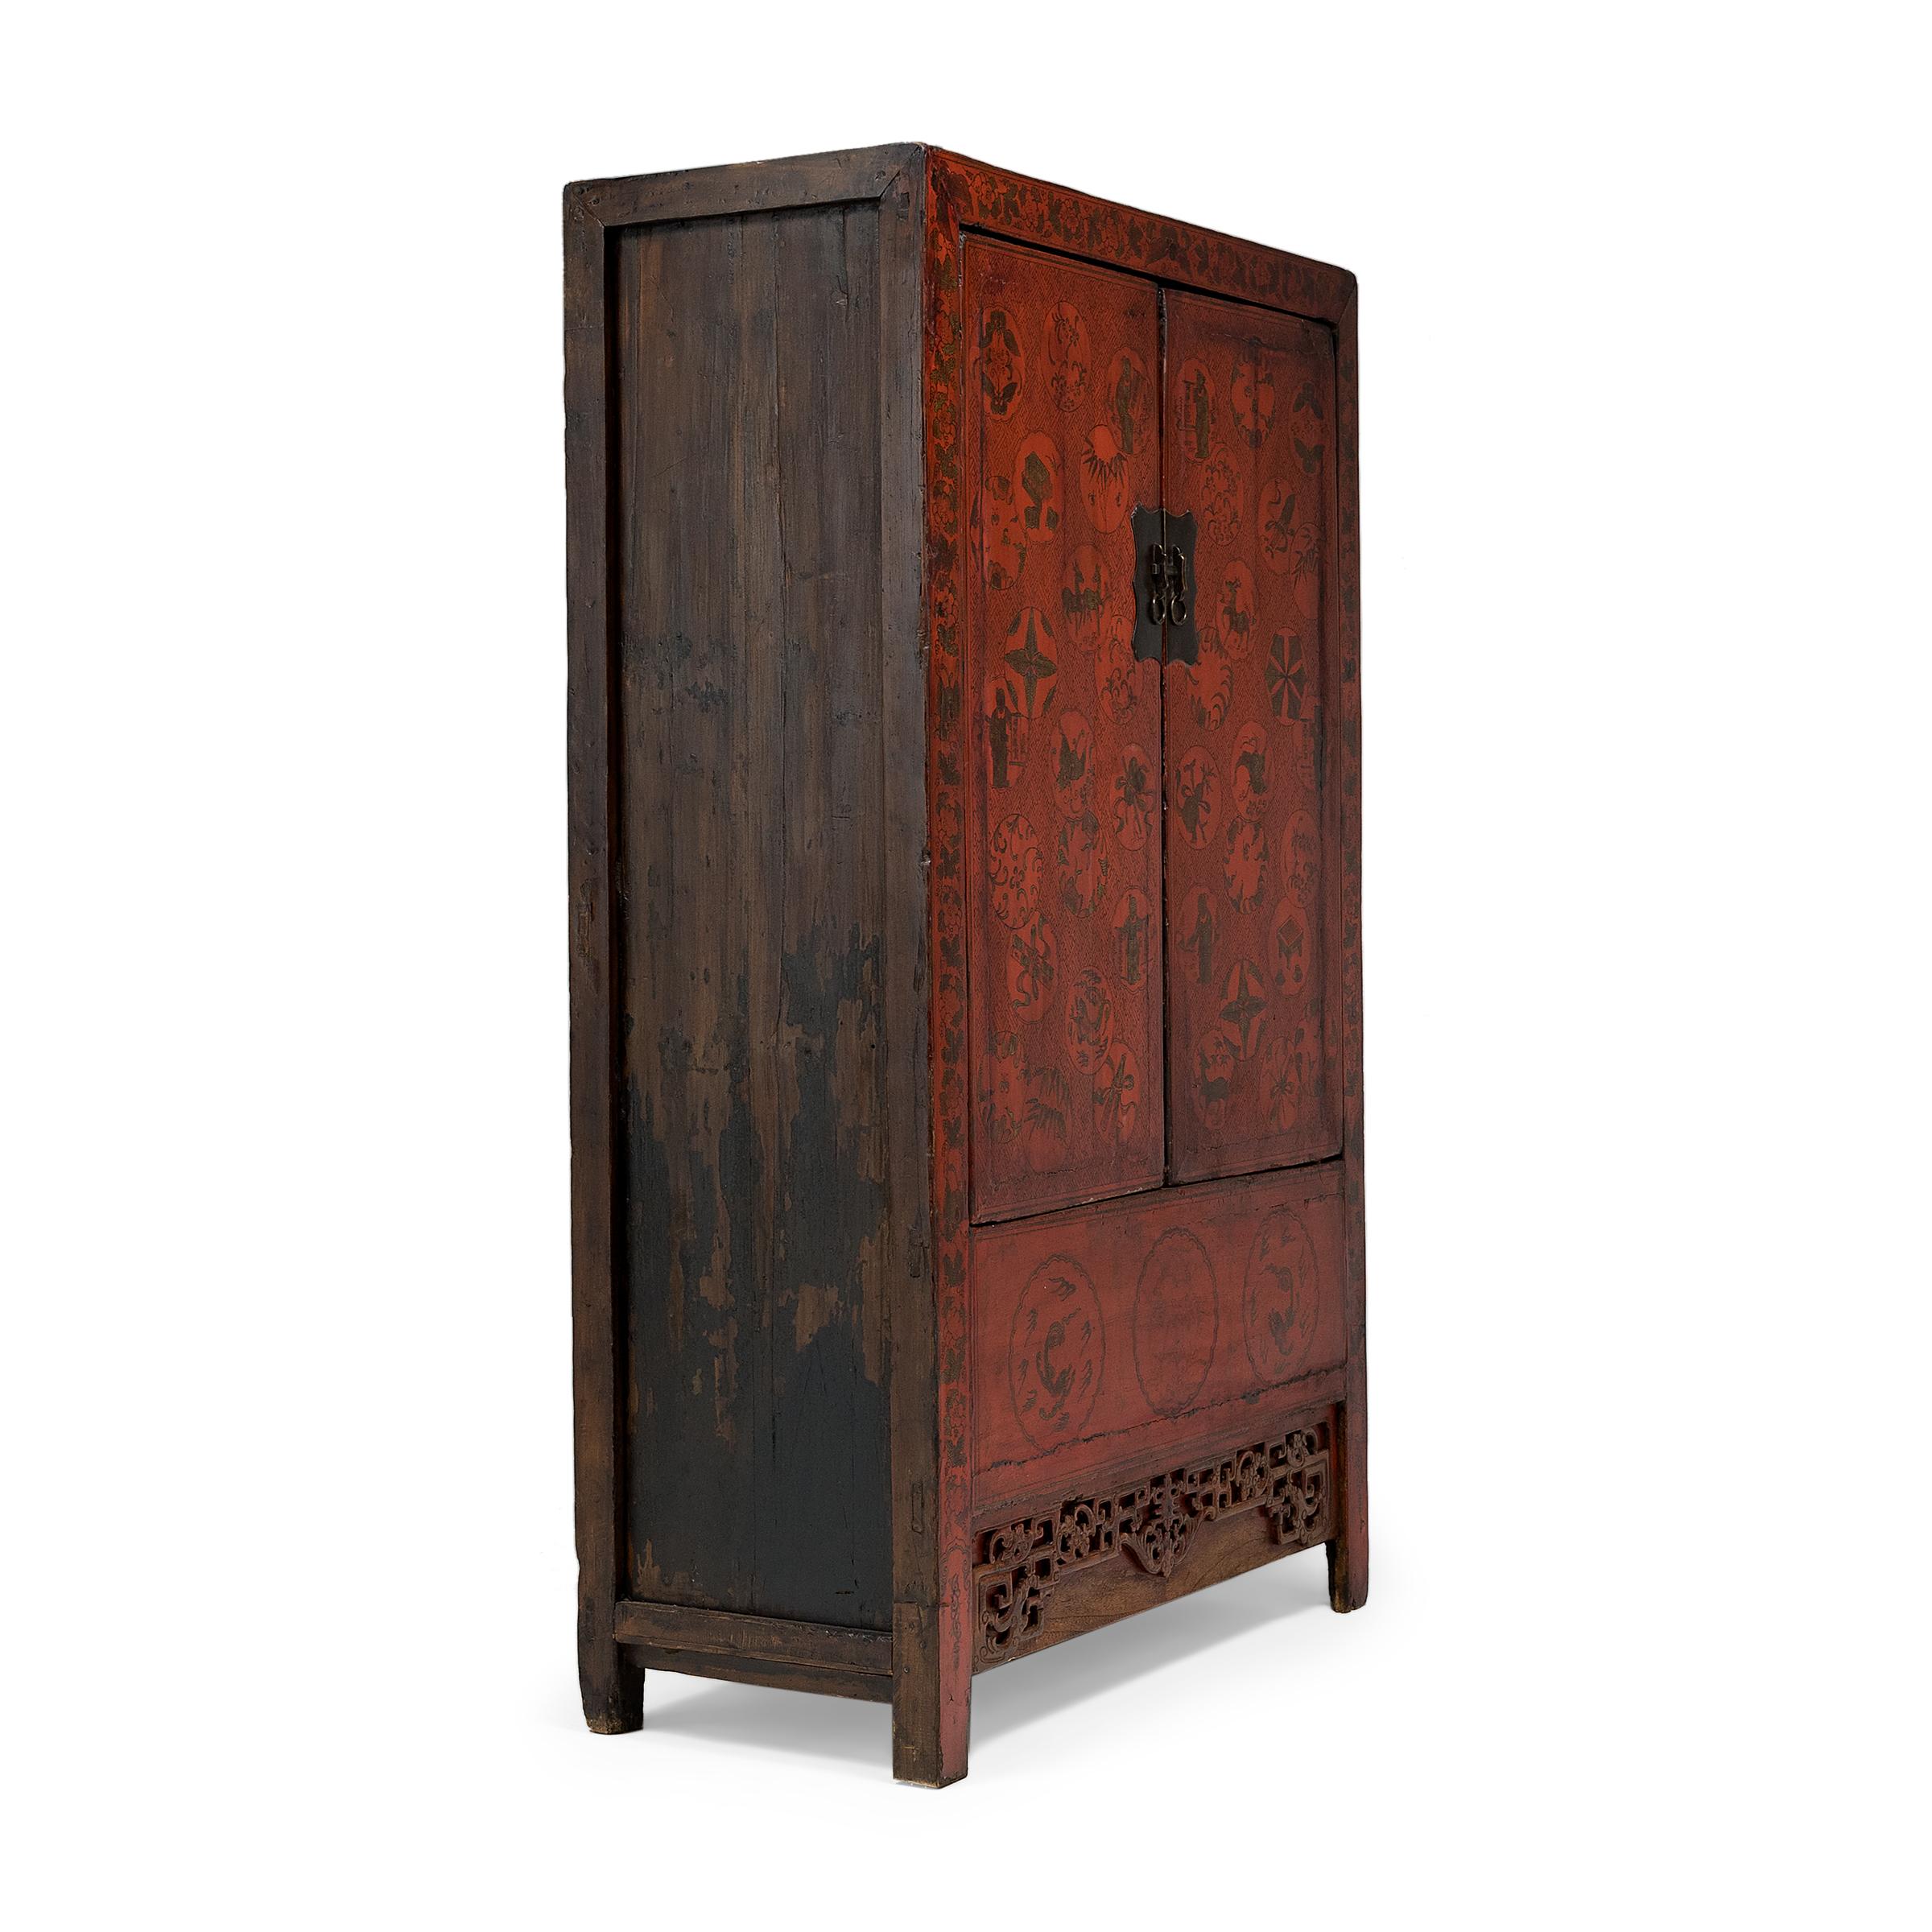 This early 20th century red lacquer cabinet is lavishly decorated with gilt accents and intricate, hand-painted line work. The tall cabinet has a clean-lined form, designed with straight sides, square corners and an ornately carved apron. The front